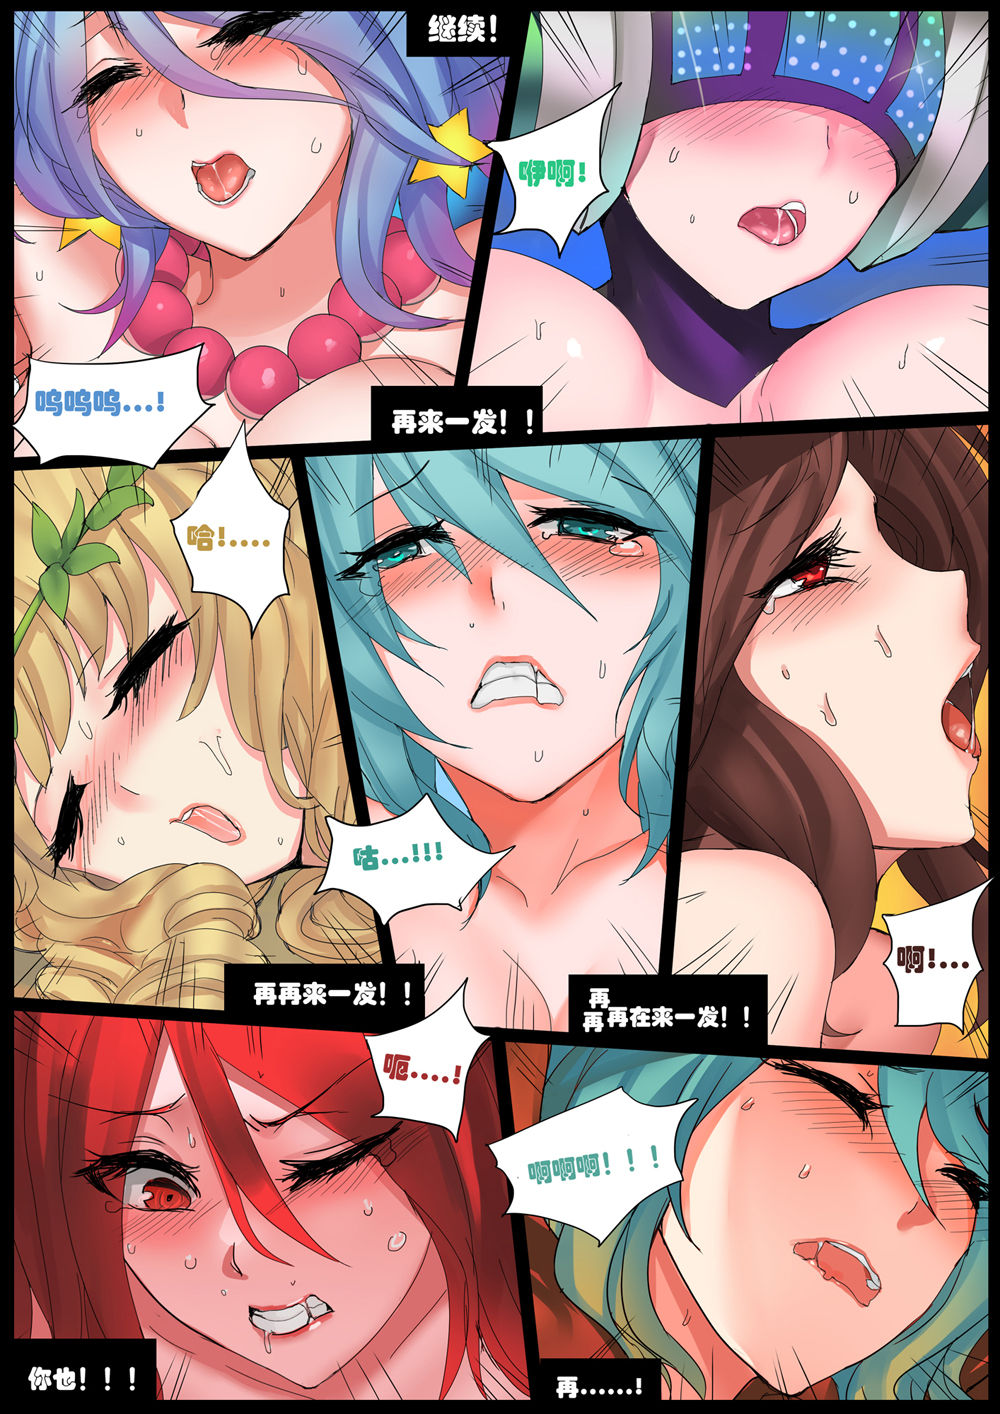 [Pd] Sona's Home Second Part (League of Legends) [Chinese] [Pd] 琴女之家[后篇] (League of Legends) [中国語]